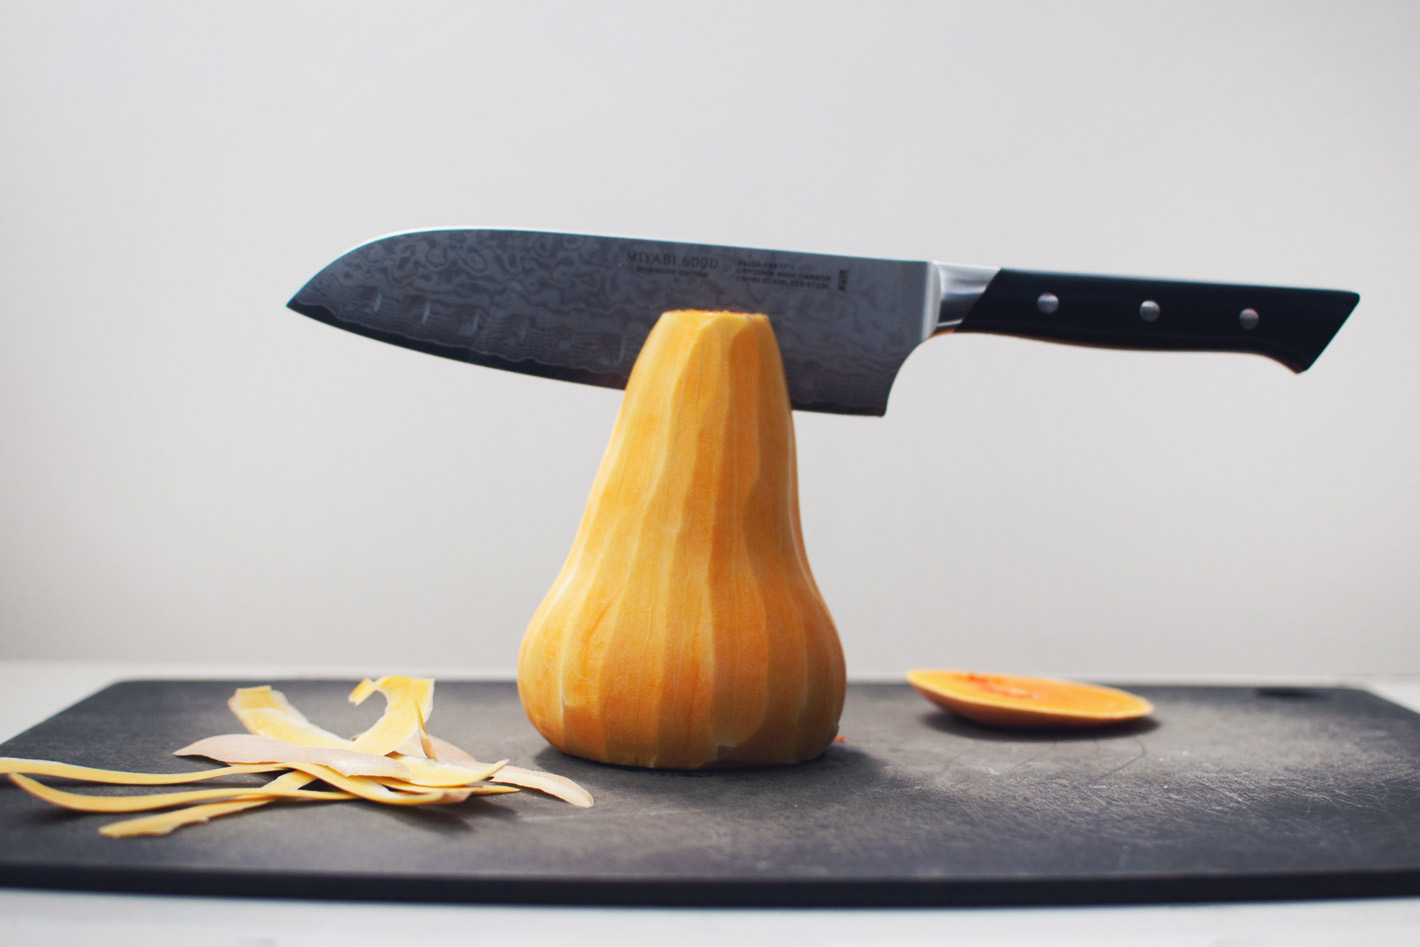 How to Roast Butternut Squash | Wake the Wolves